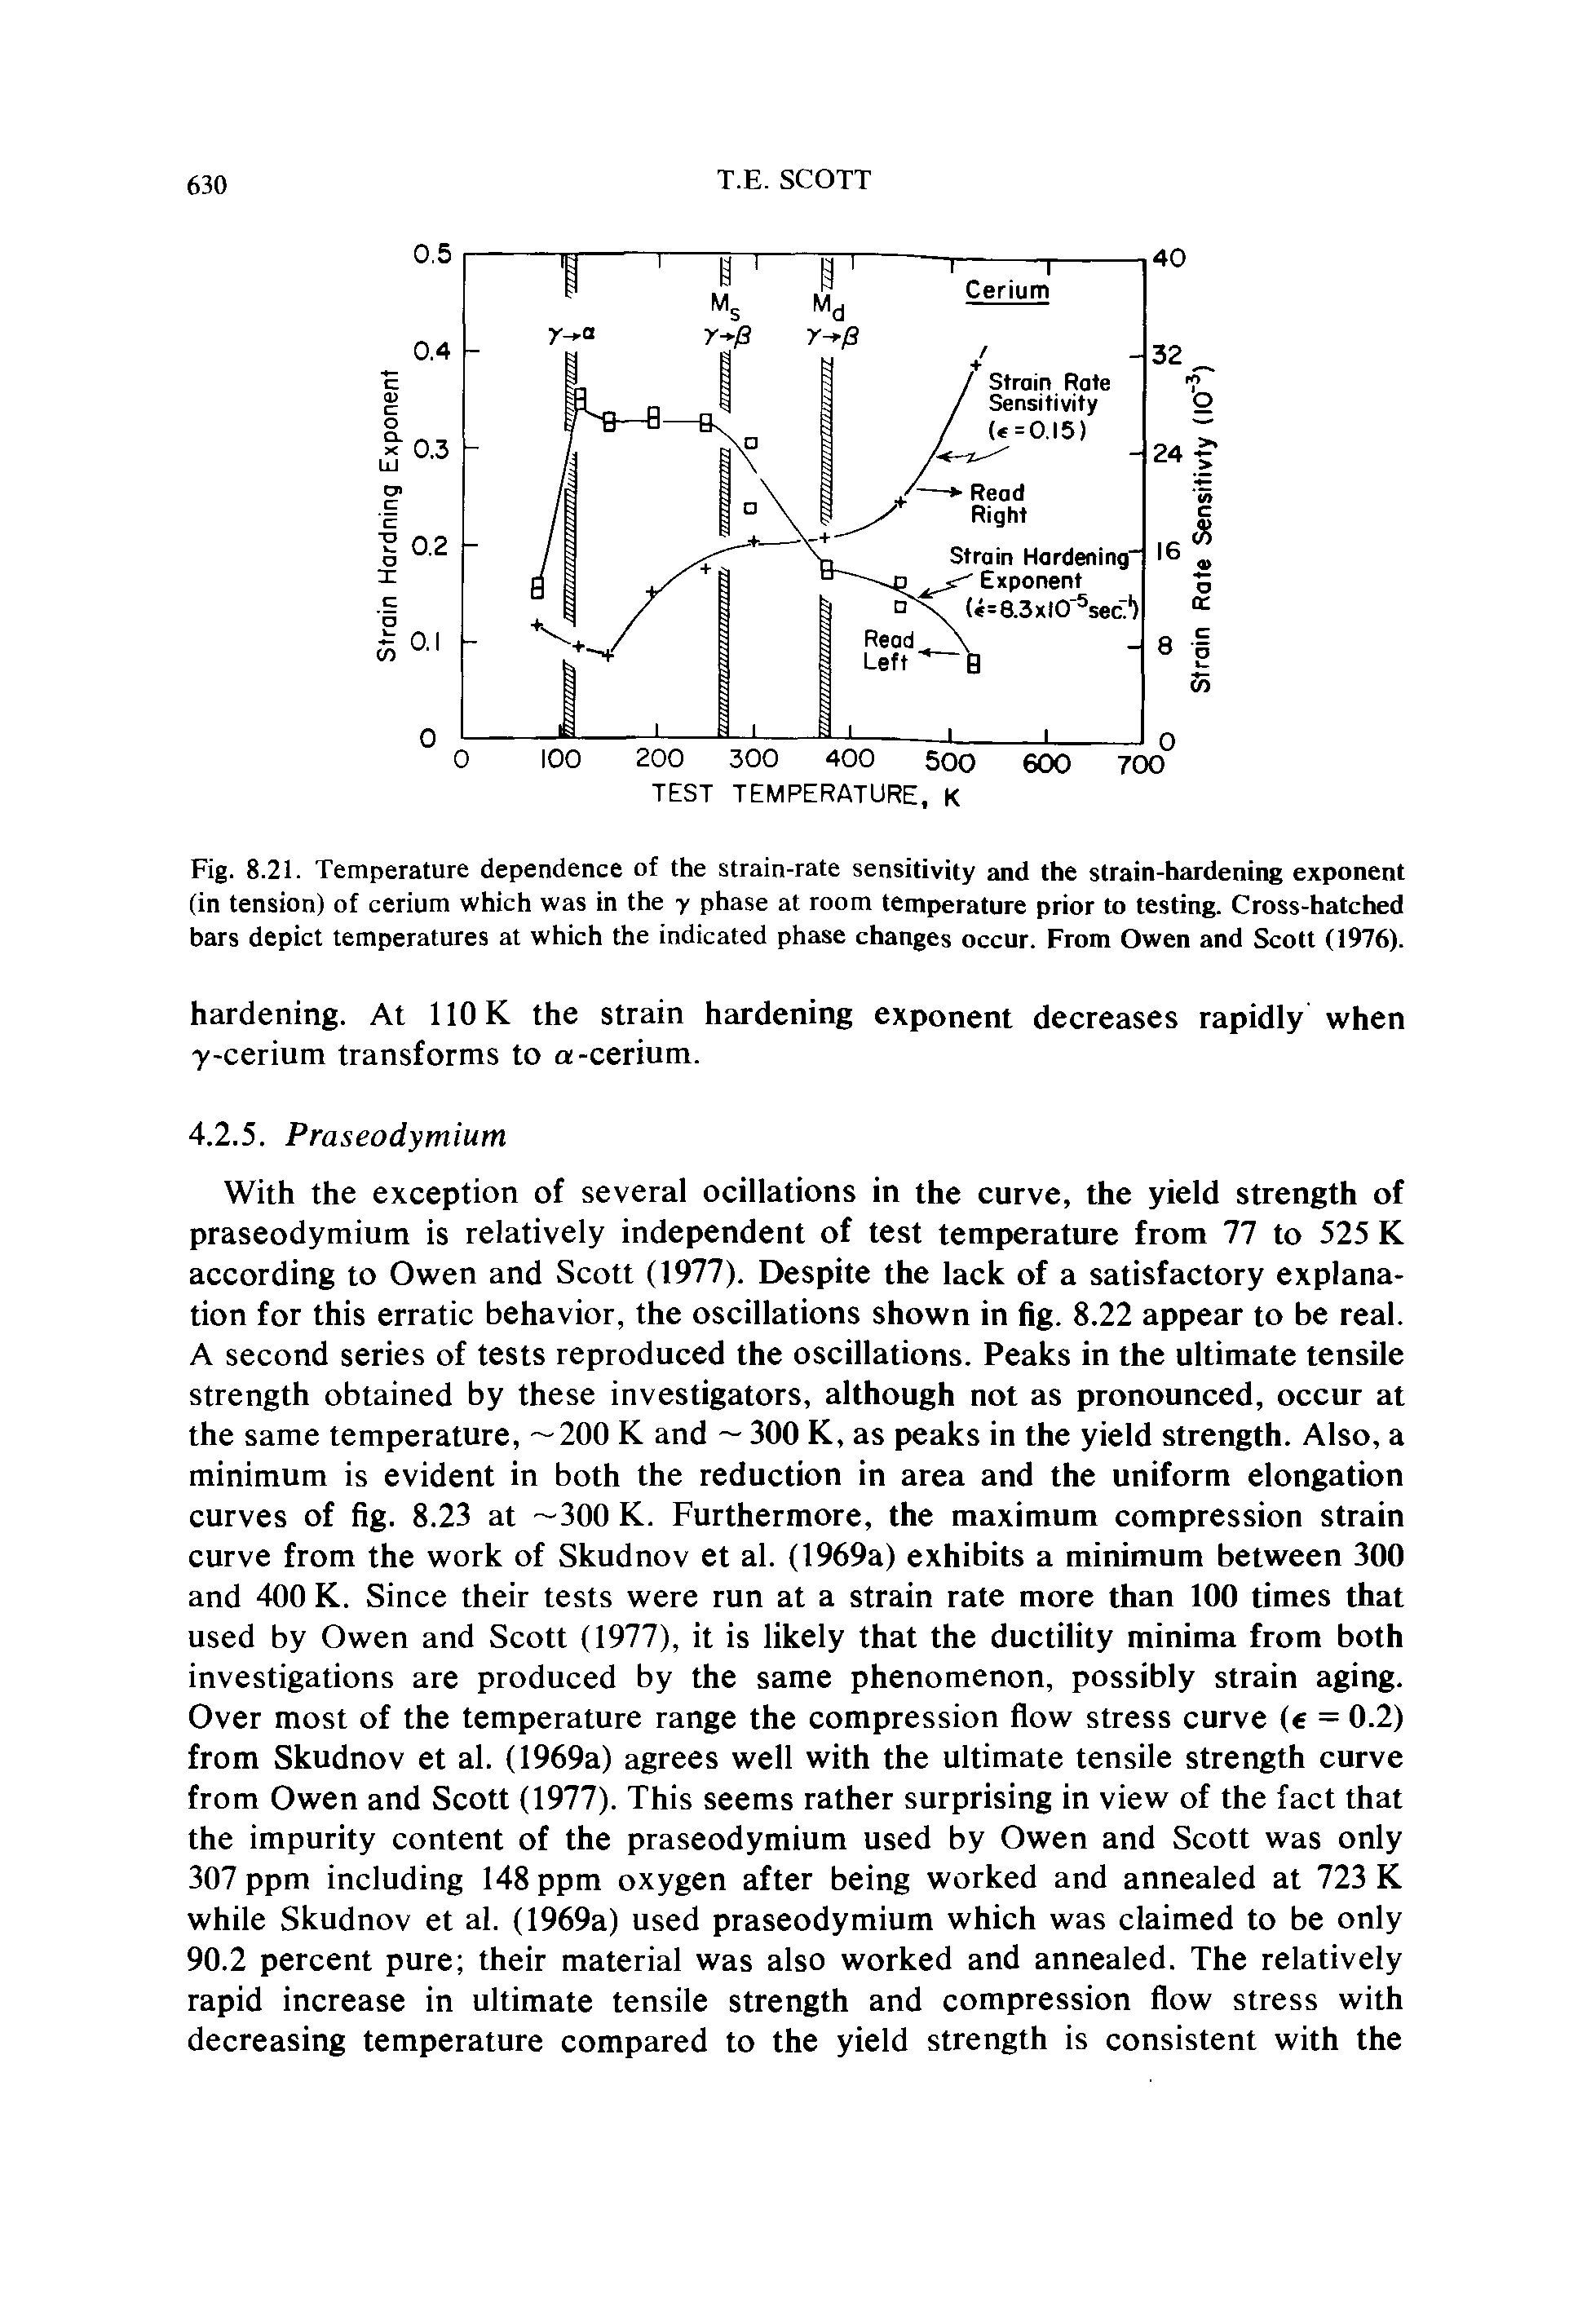 Fig. 8.21. Temperature dependence of the strain-rate sensitivity and the strain-hardening exponent (in tension) of cerium which was in the y phase at room temperature prior to testing. Cross-hatched bars depict temperatures at which the indicated phase changes occur. From Owen and Scott (1976).